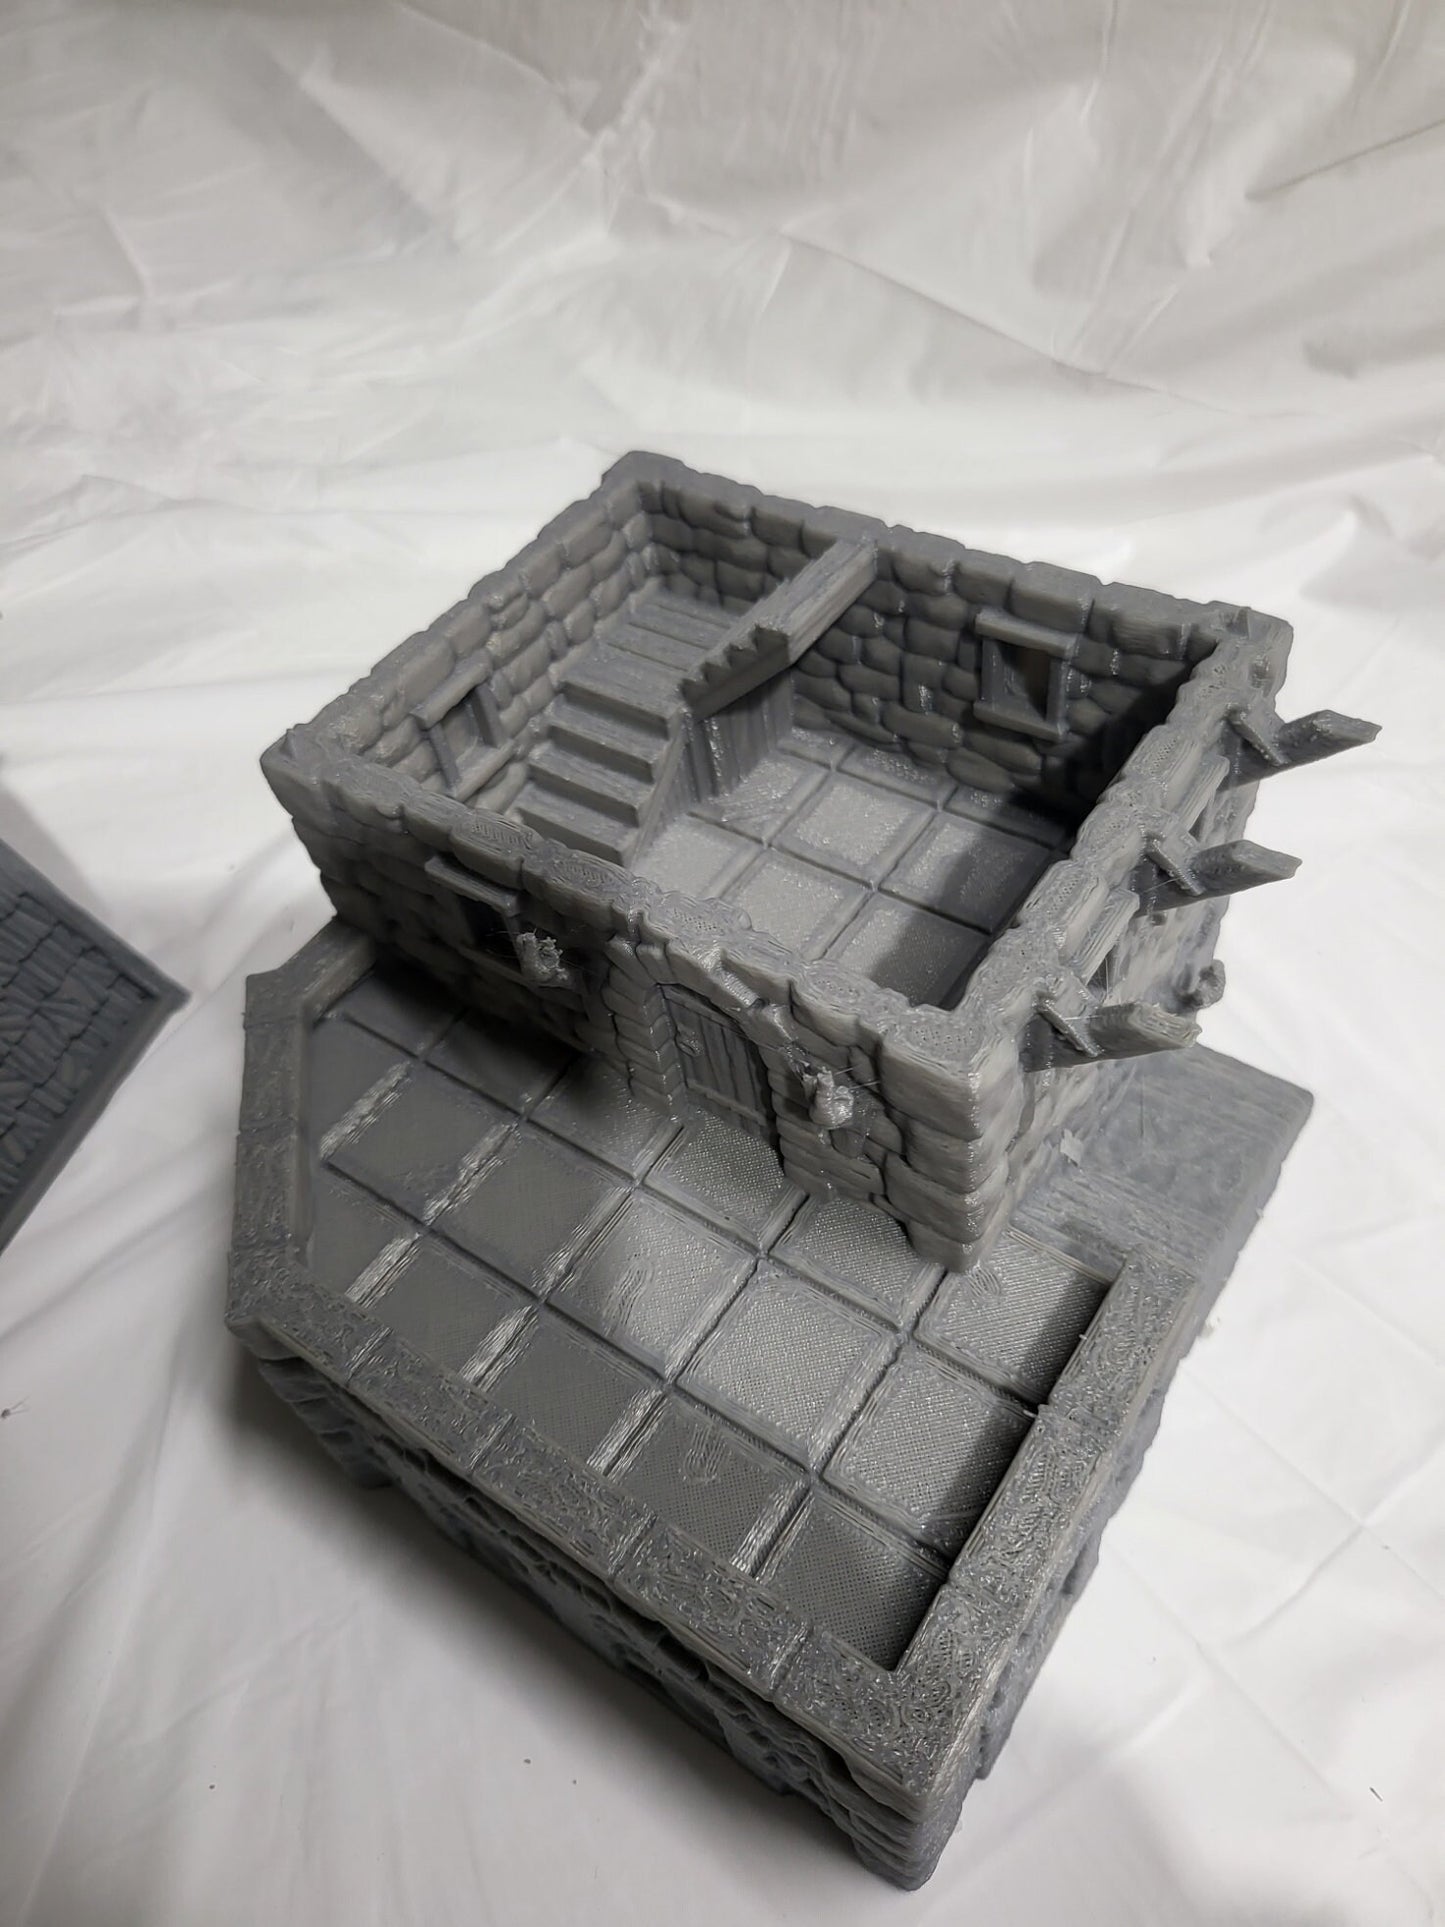 Stormhill Theives Guild, Tabletop Gaming, 28mm Scale, Stormhill City, city set, dungeons and dragons